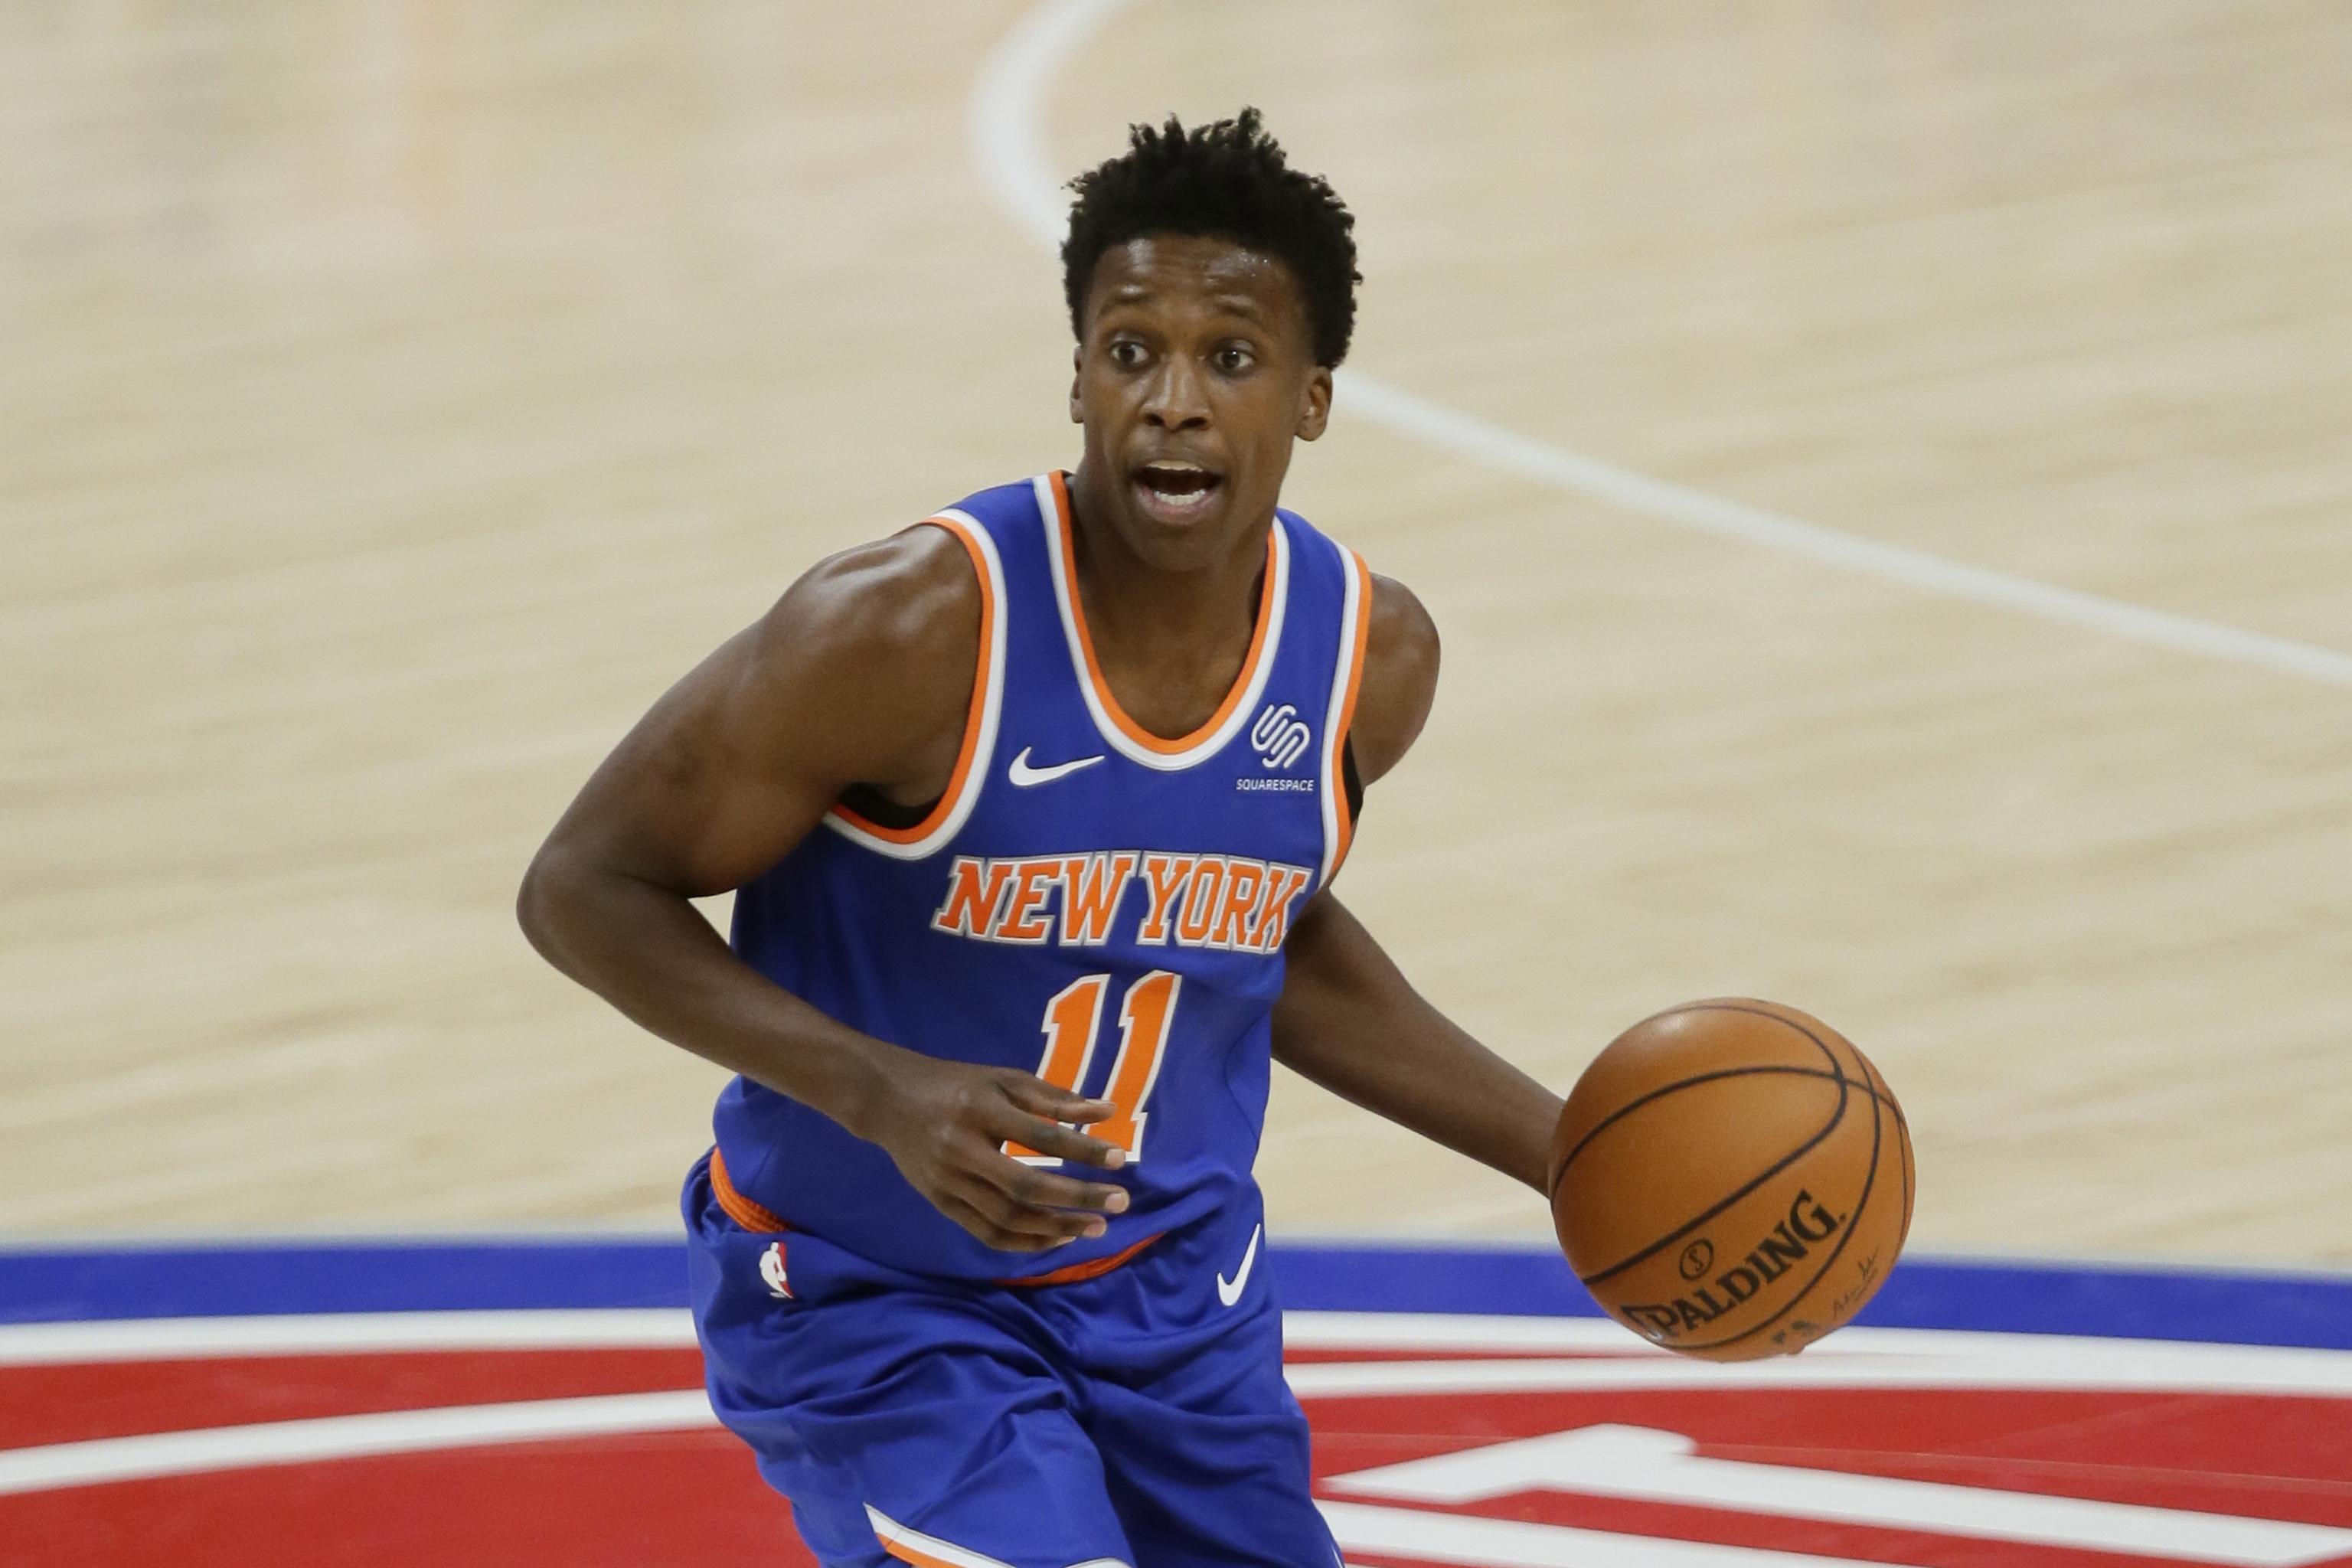 Frank Ntilikina has come to feel at home with the Knicks and New York this  season. That matters. - The Athletic